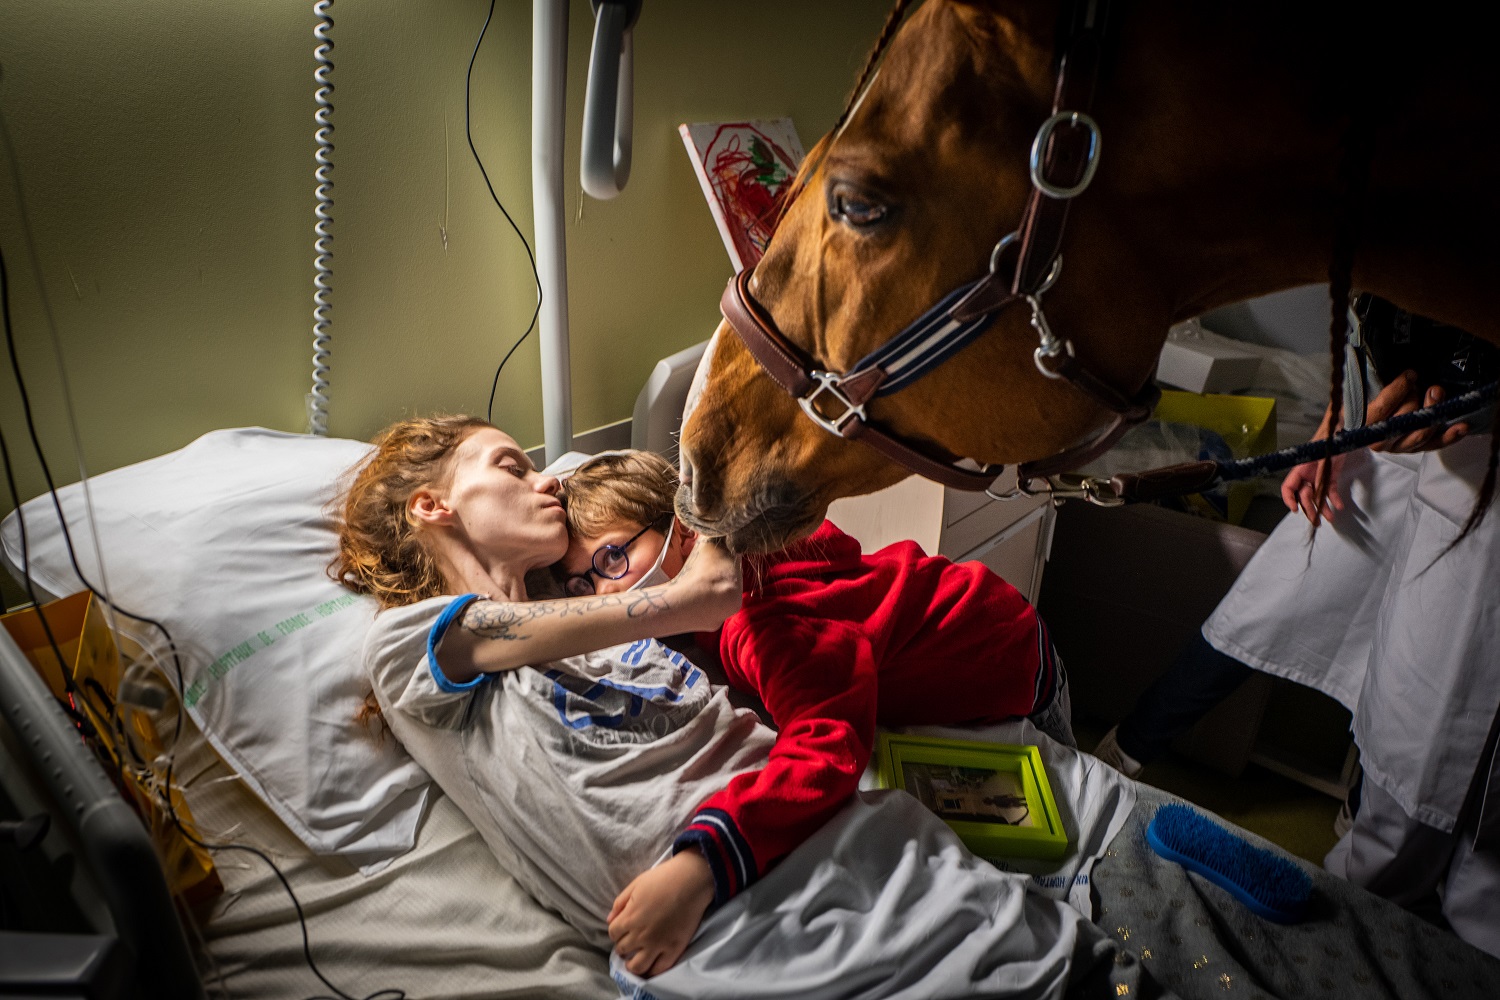 Horse in a hospital room with cancer patient and child